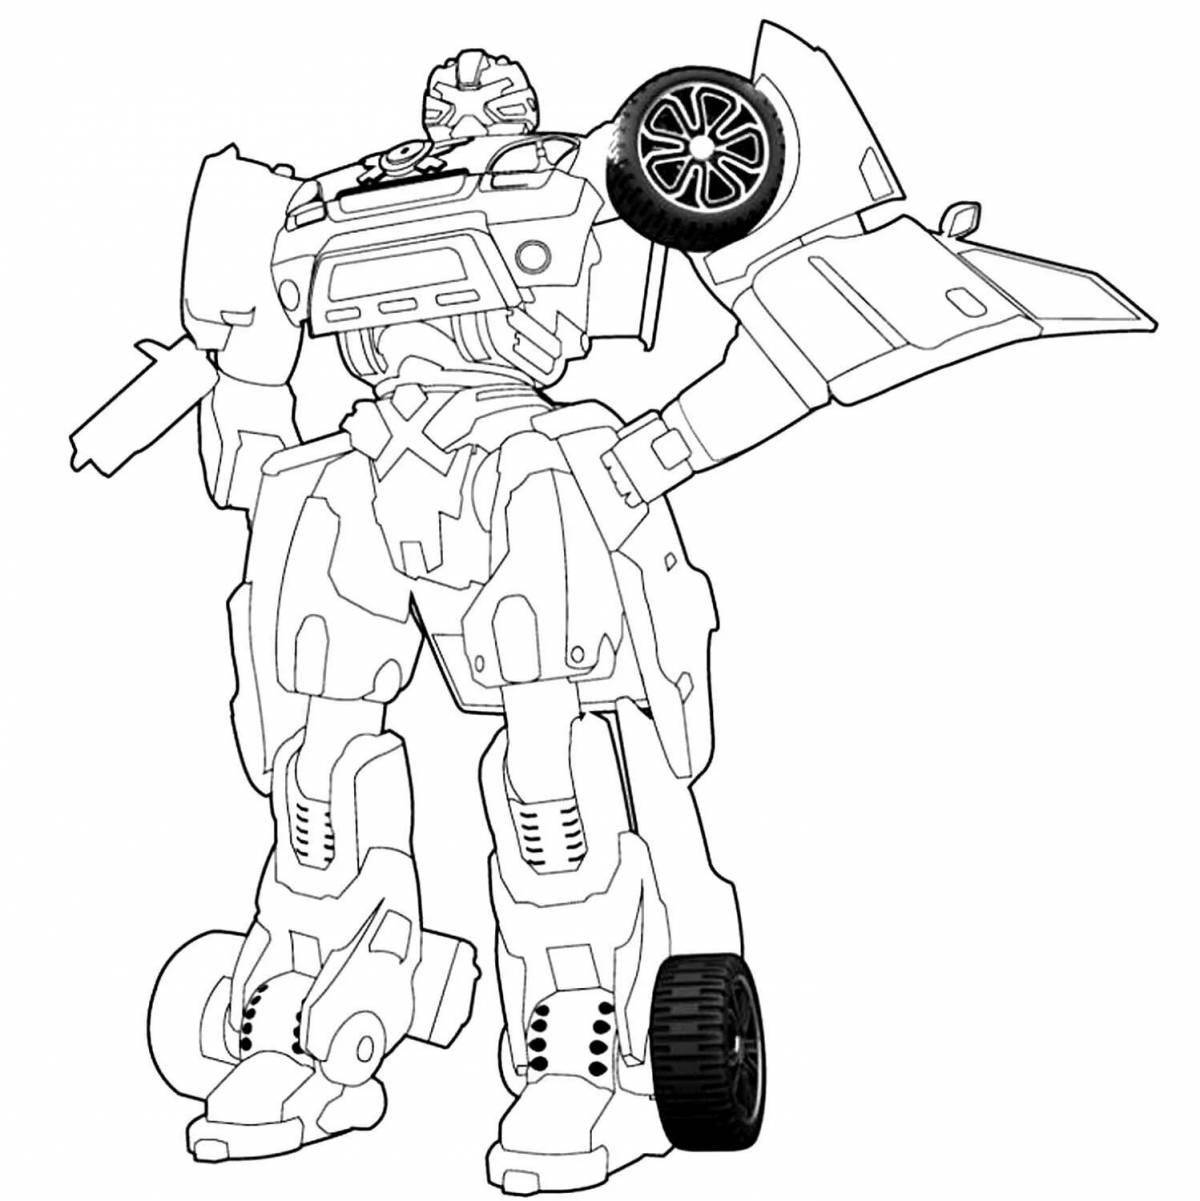 Attractive magma 6 tobot coloring page